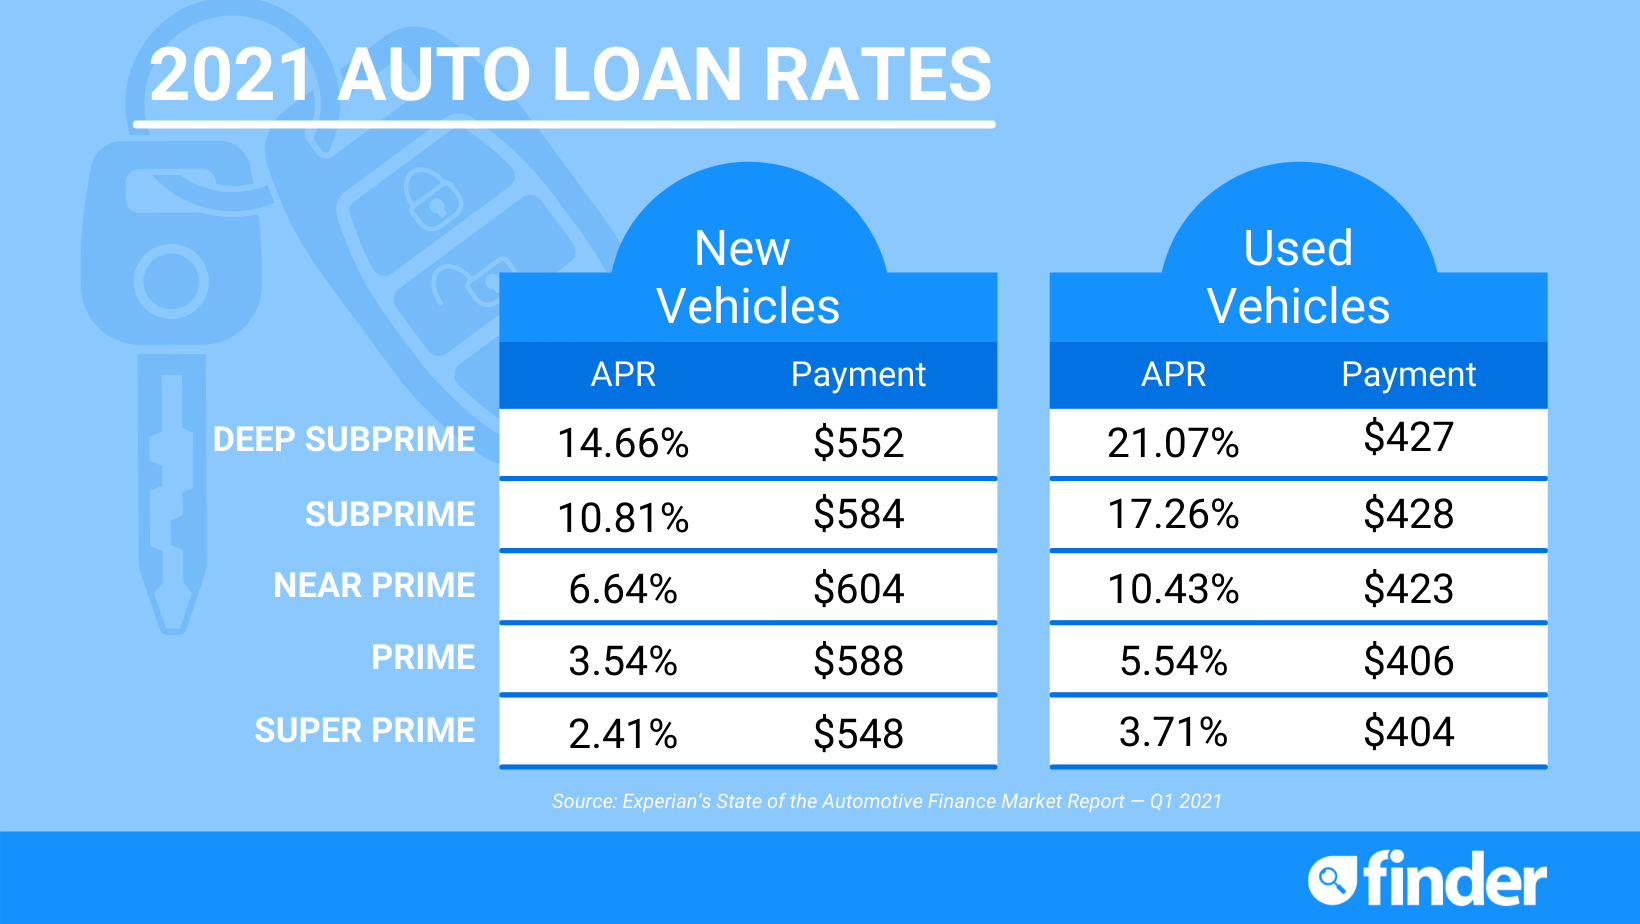 Current Auto Loan Rates + Best Lenders of 2021 | Finder